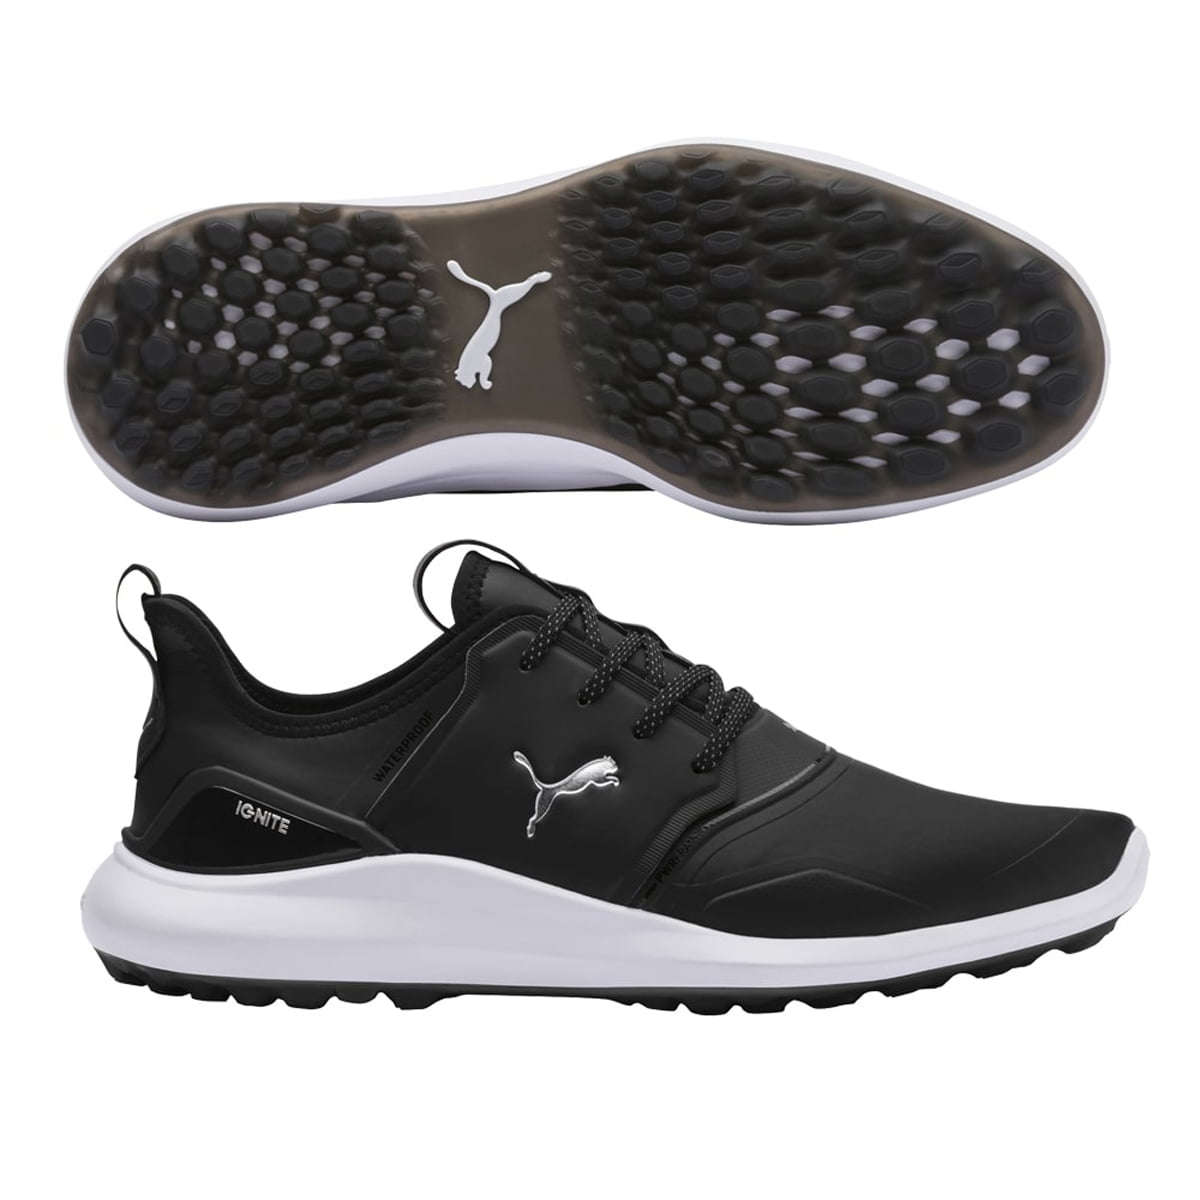 walmart golf shoes in store